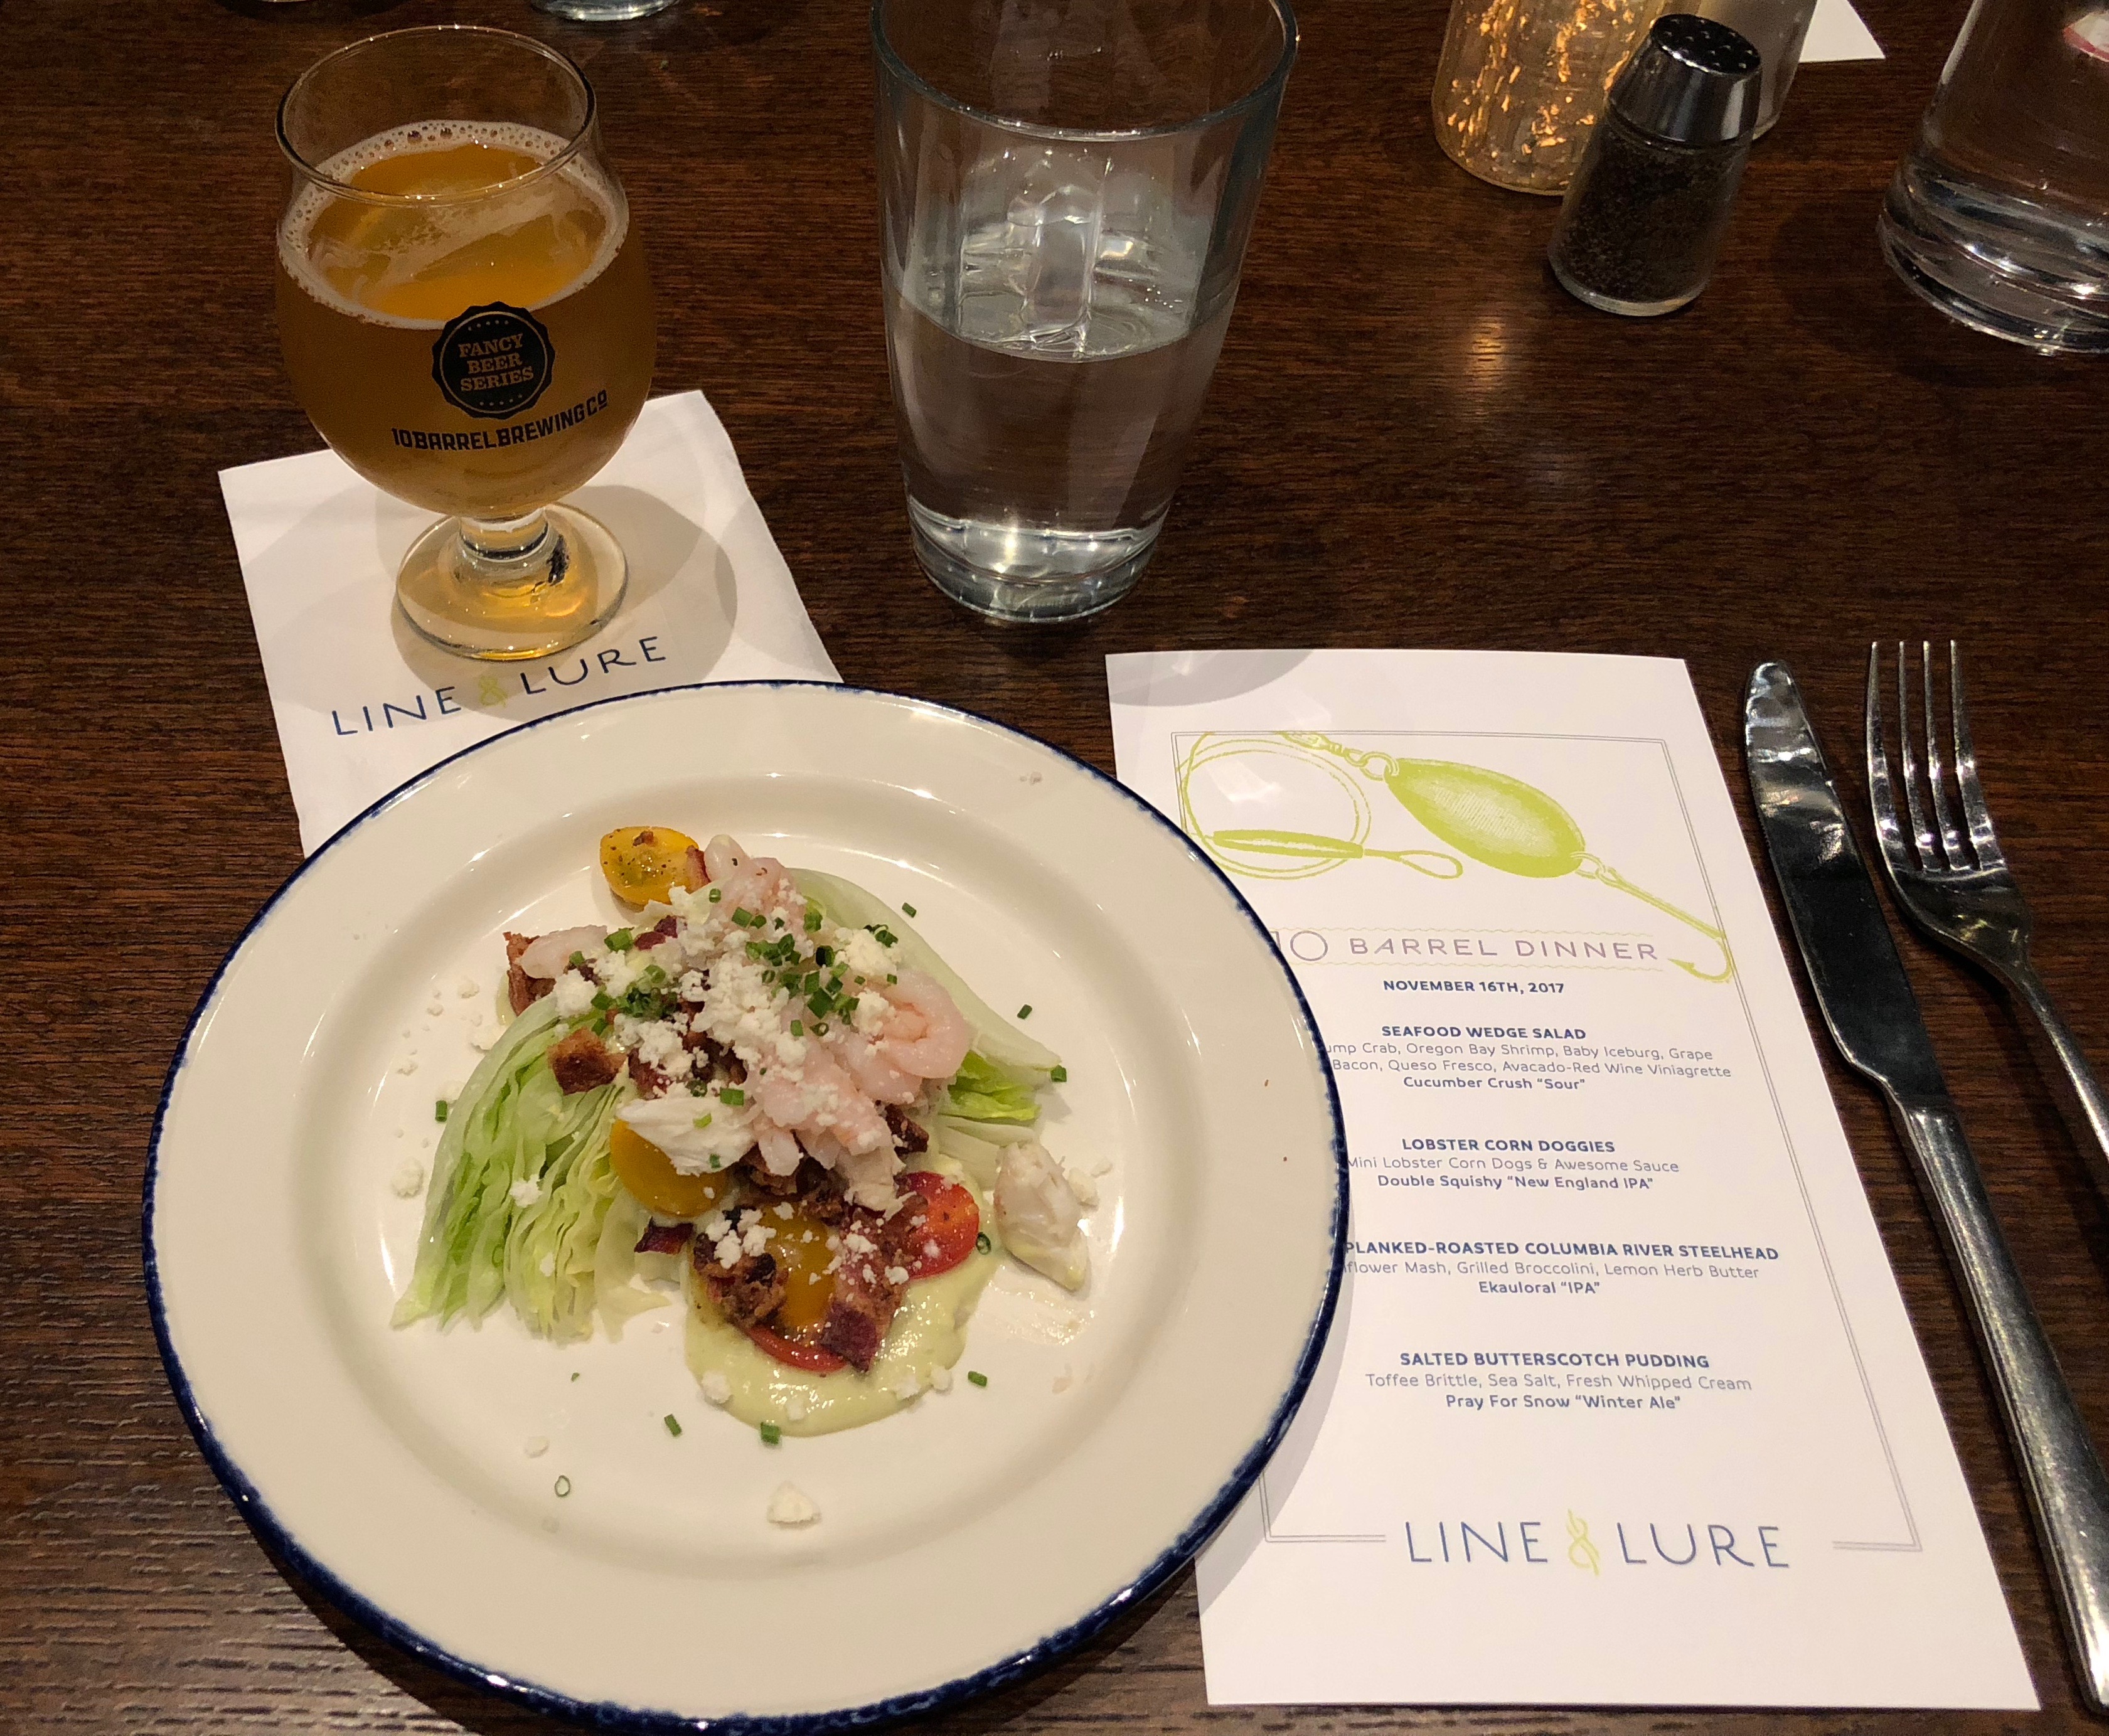 Attend a beer and seafood dinner at a casino? Why not? Line & Lure provided a great dinner and experience when it partnered with 10 Barrel Brewing for a dinner inside ilani Casino & Resort.